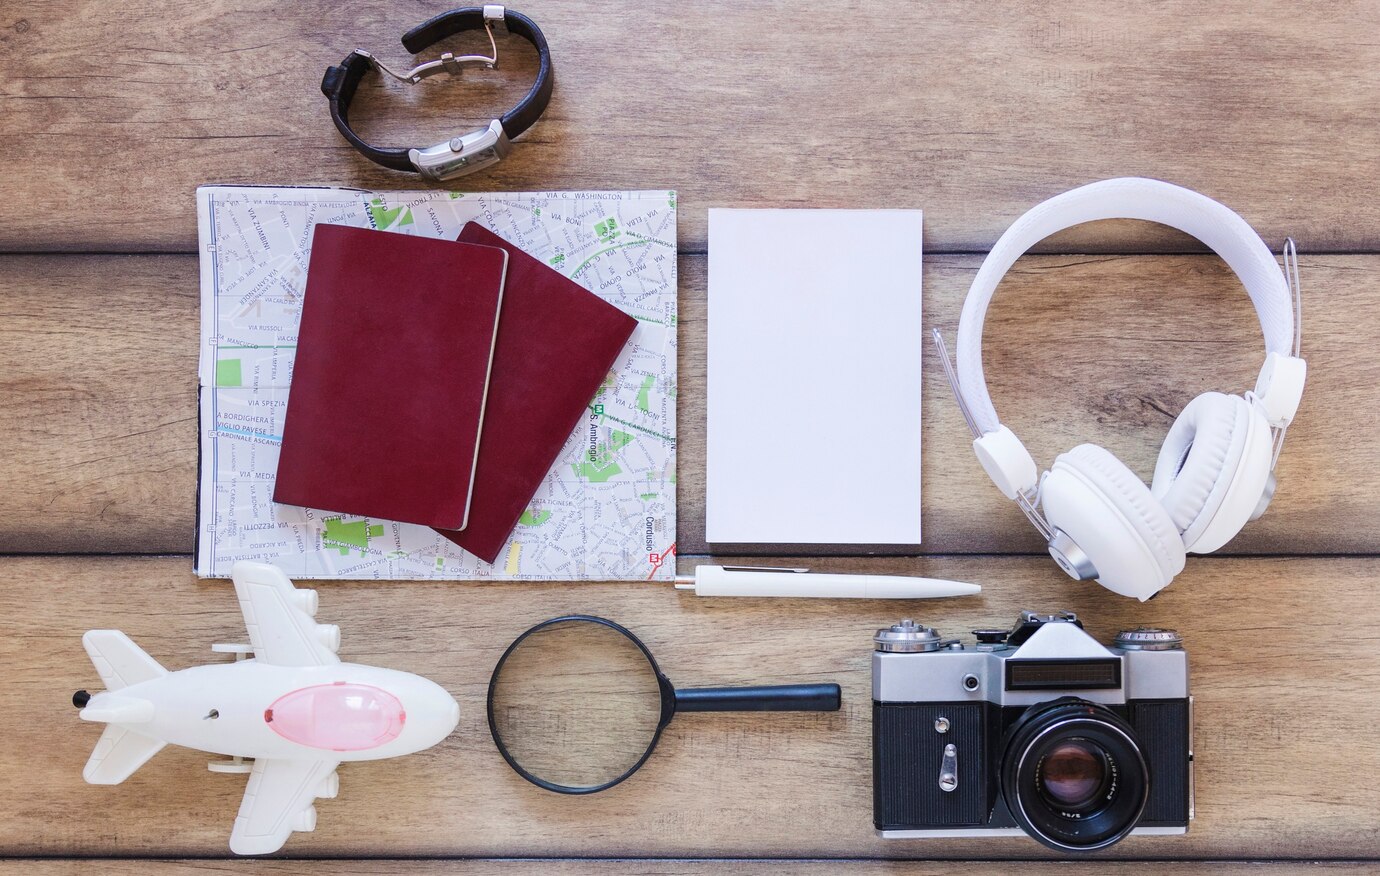 Essential Photo Requirements for Global Travel Documents